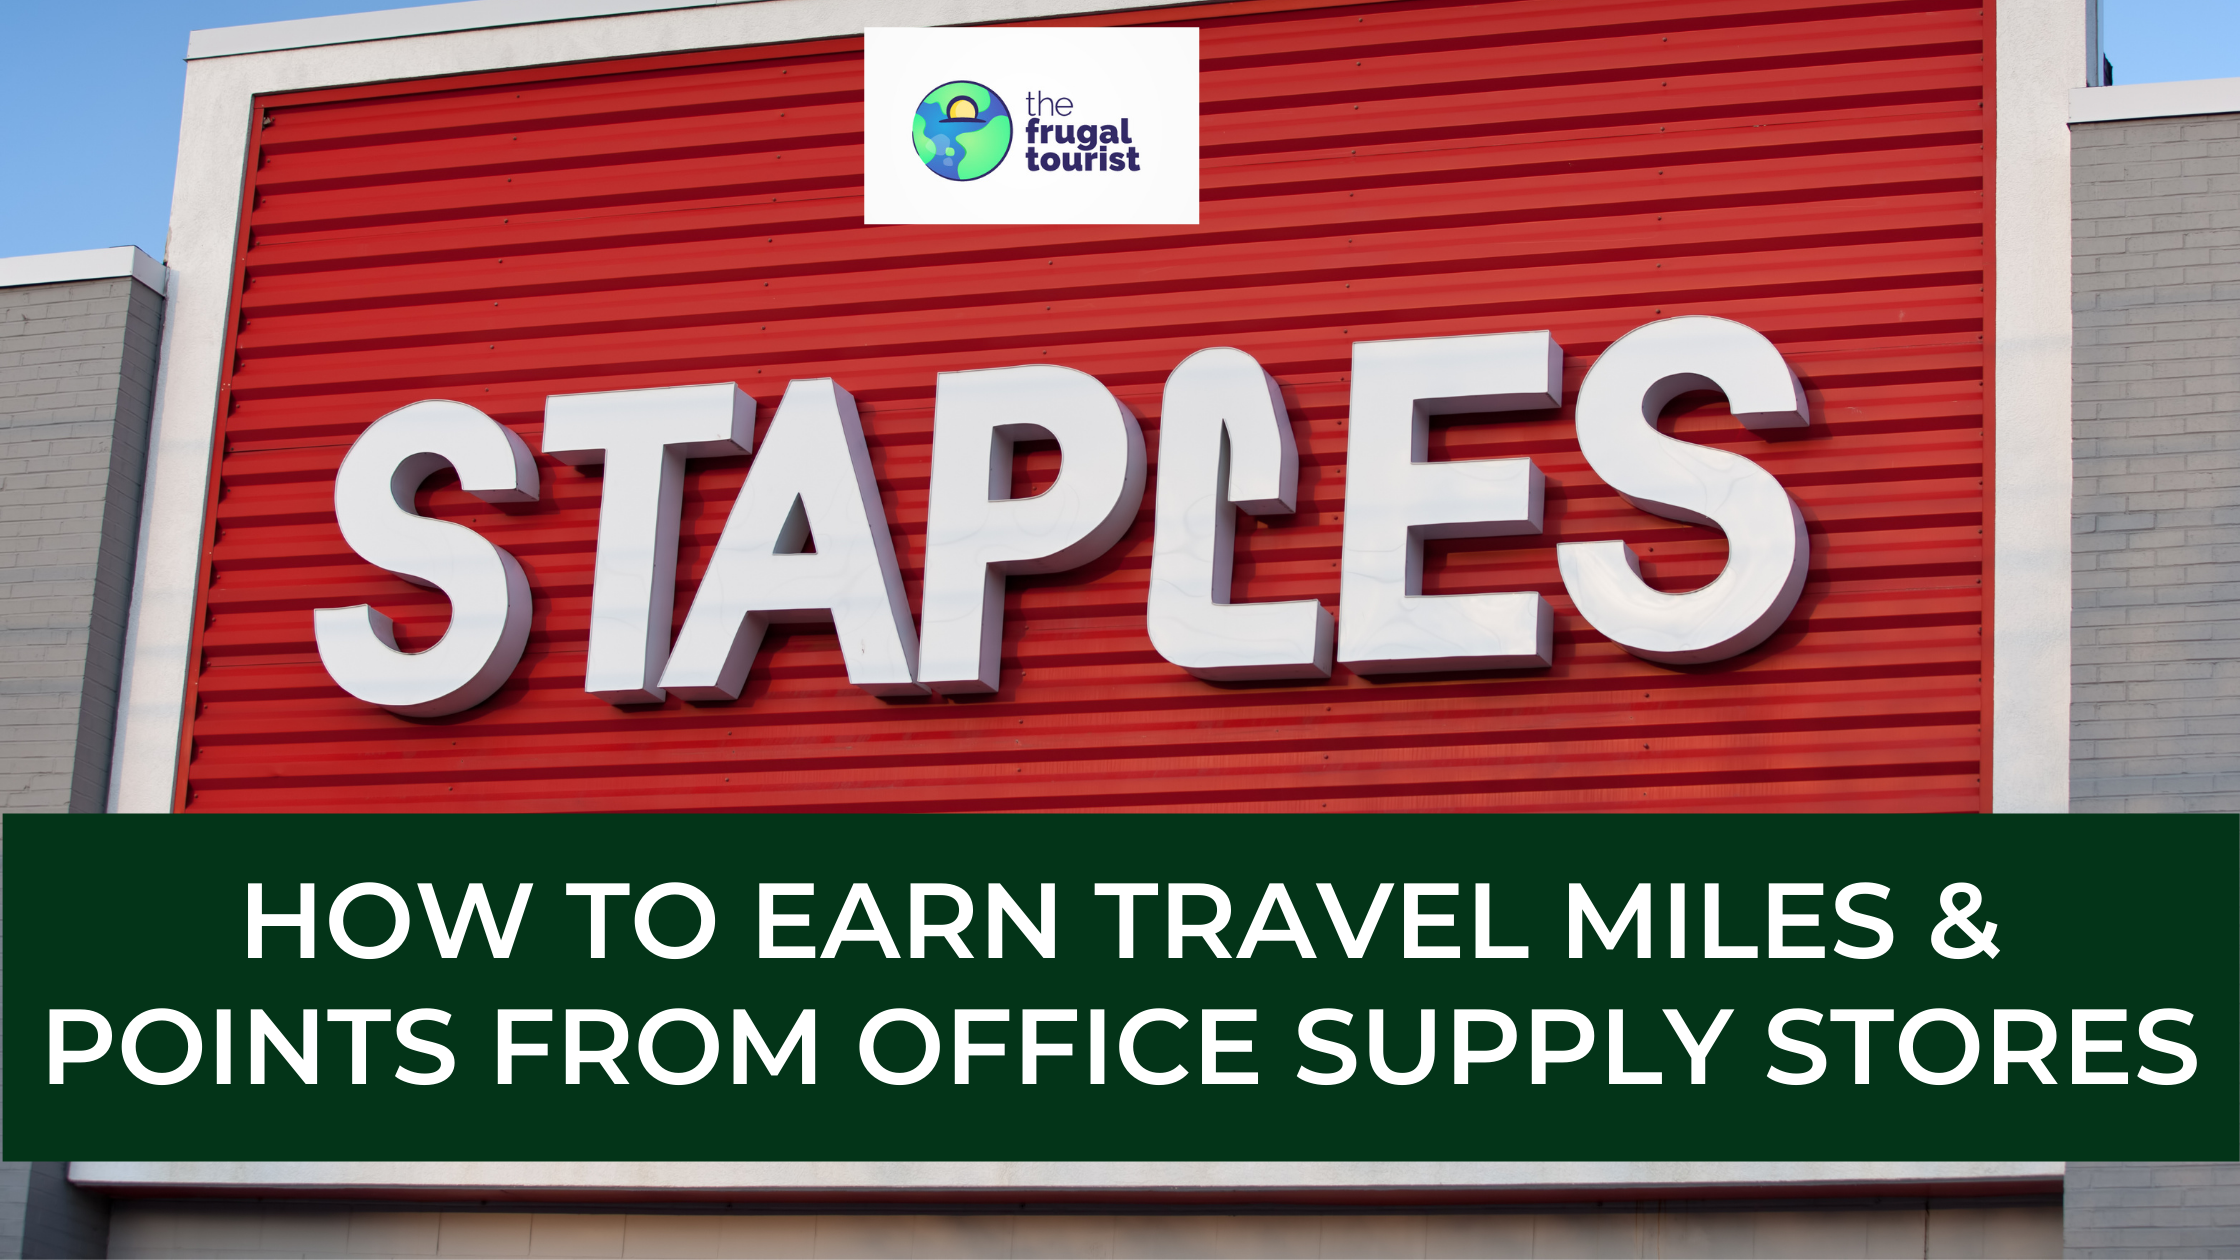 How to Earn Travel Miles & Points from Office Supply Stores